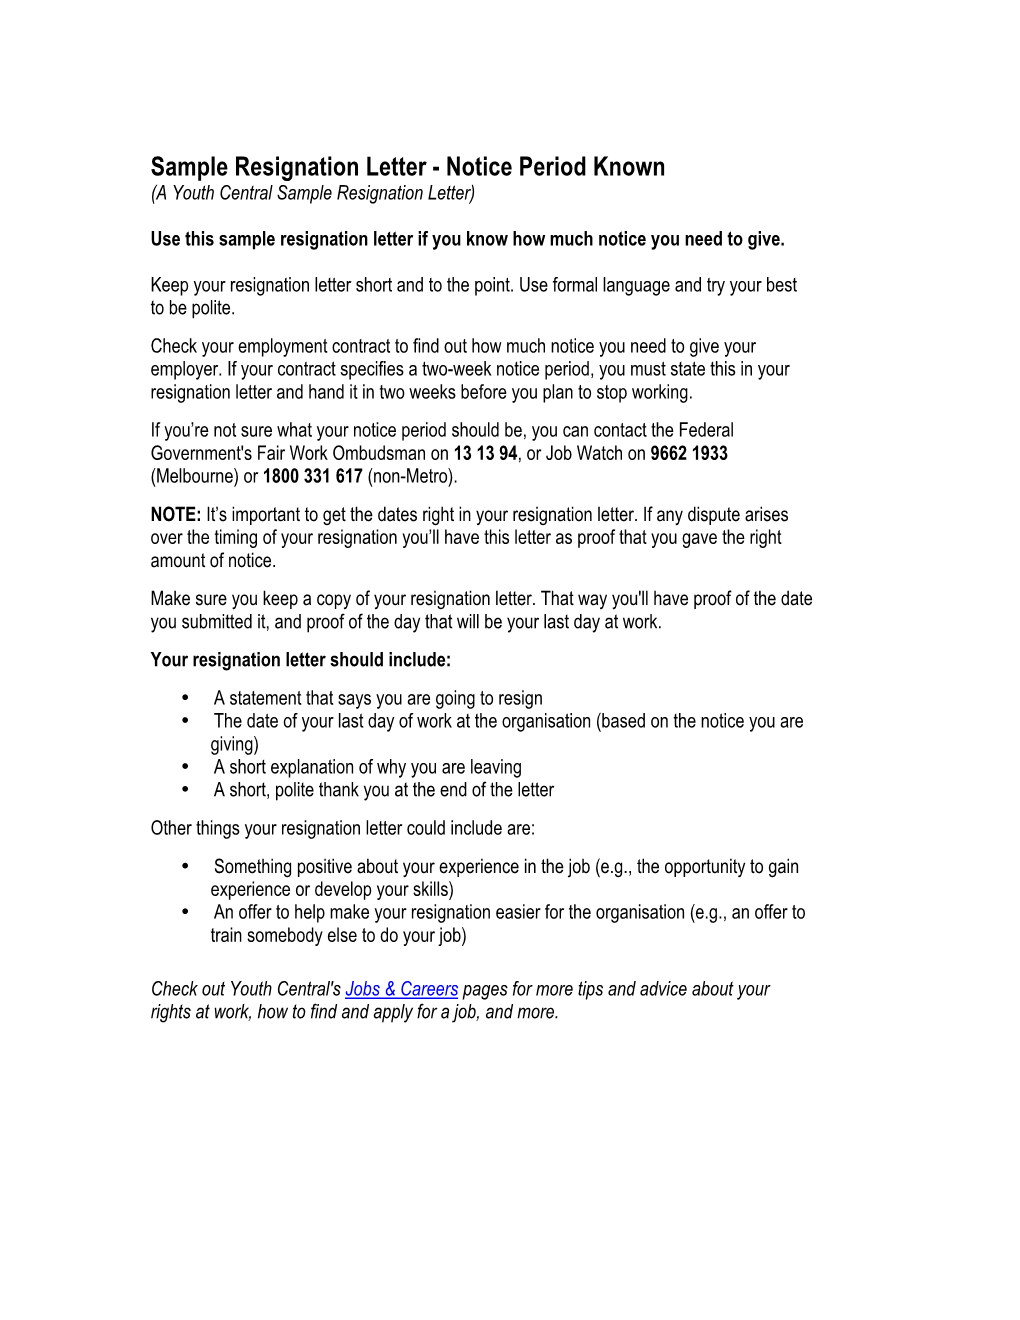 Sample Resignation Letter - Notice Period Known (A Youth Central Sample Resignation Letter)